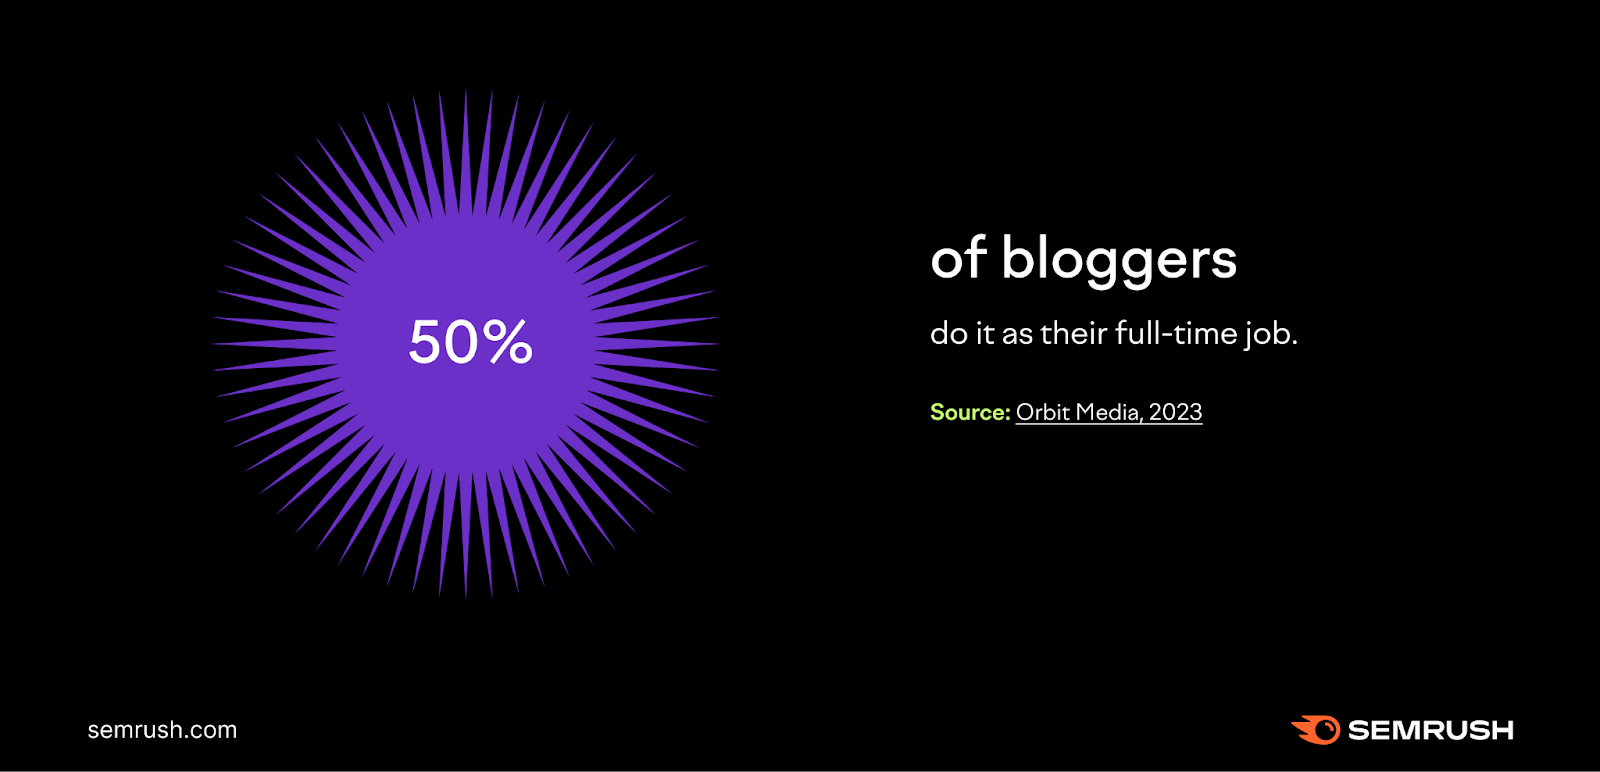 50% of bloggers do it as their full-time job.